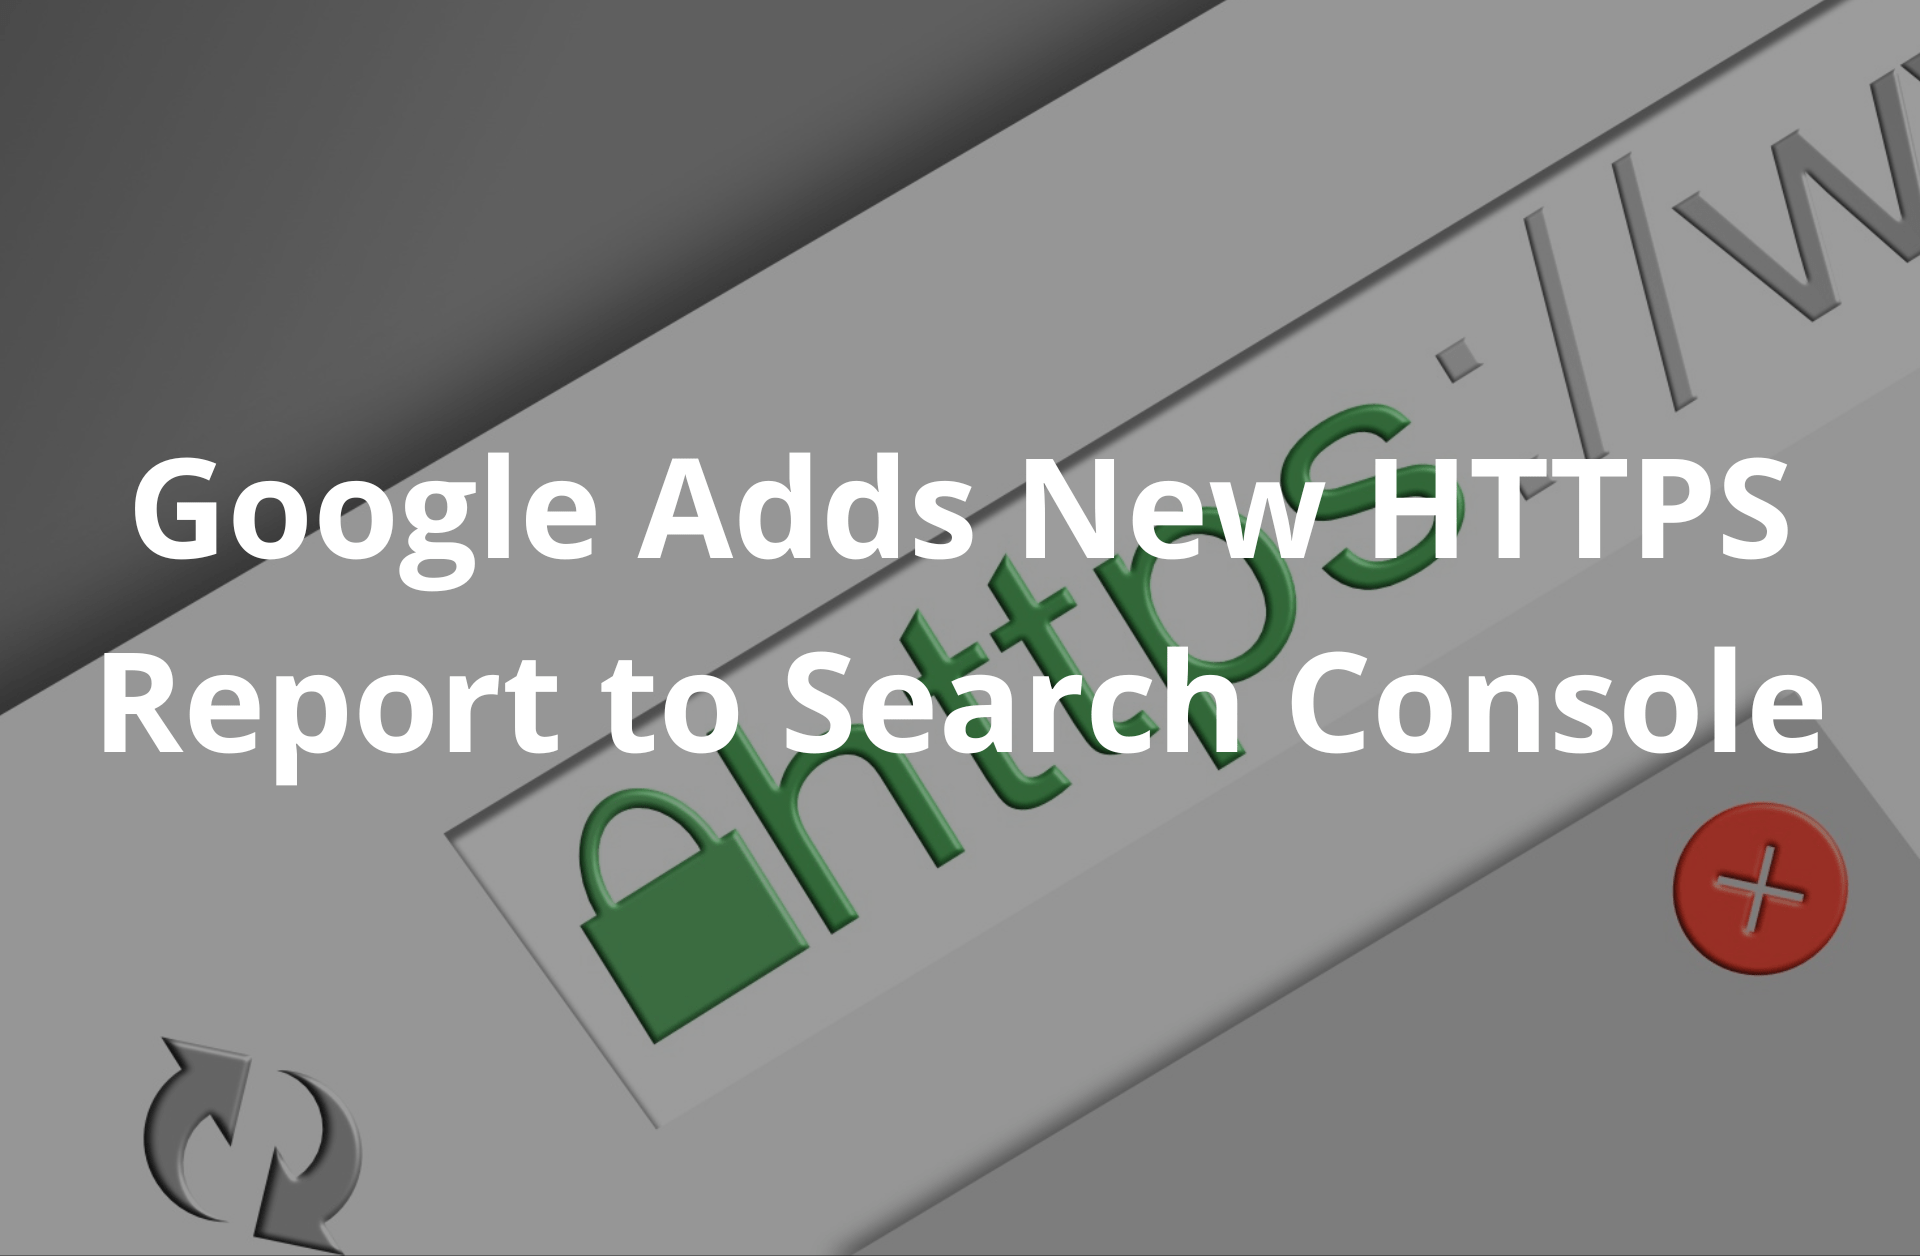 You are currently viewing Google Adds New HTTPS Report to Search Console